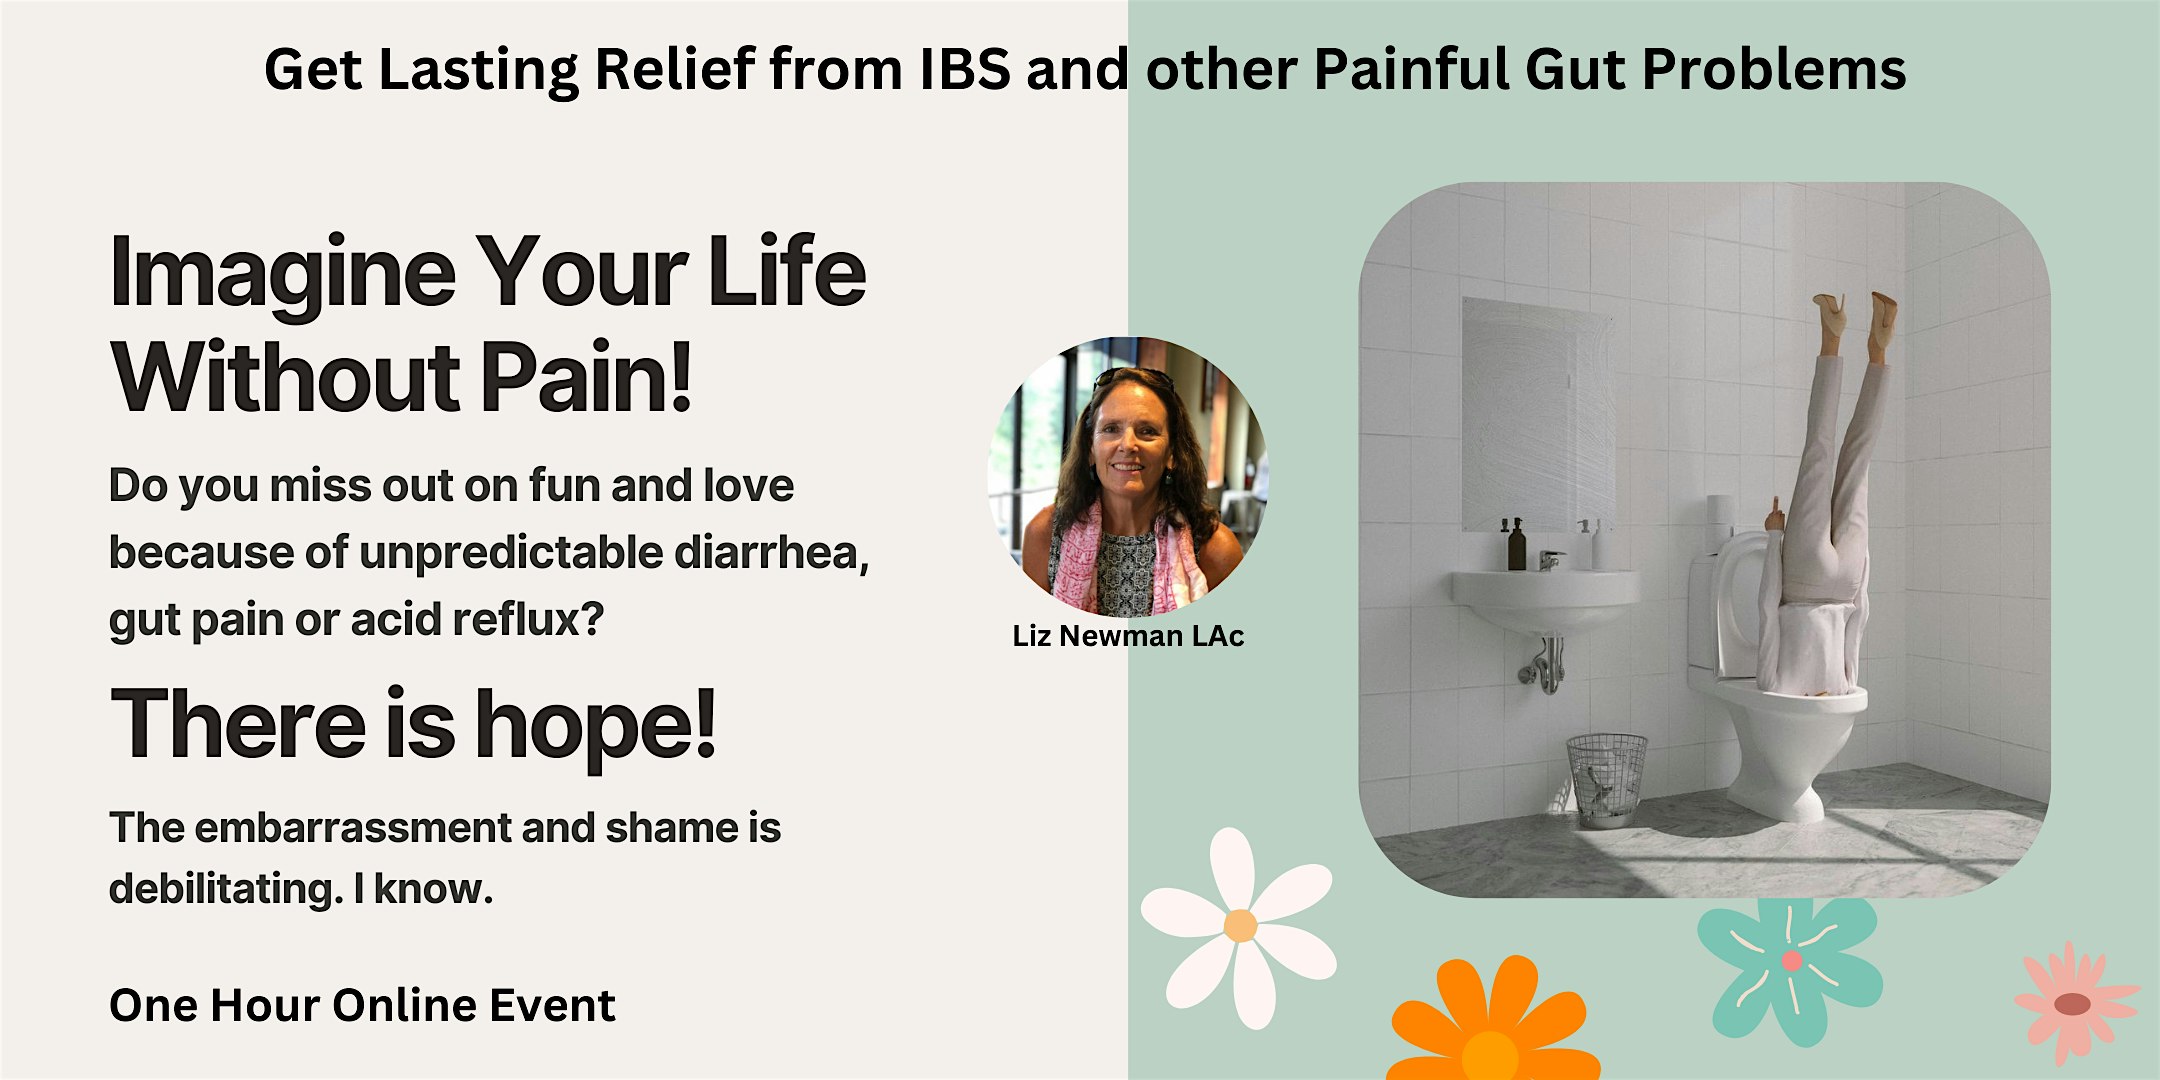 Copy of Get Lasting Relief from IBS and Painful Gut Problems - Visalia CA